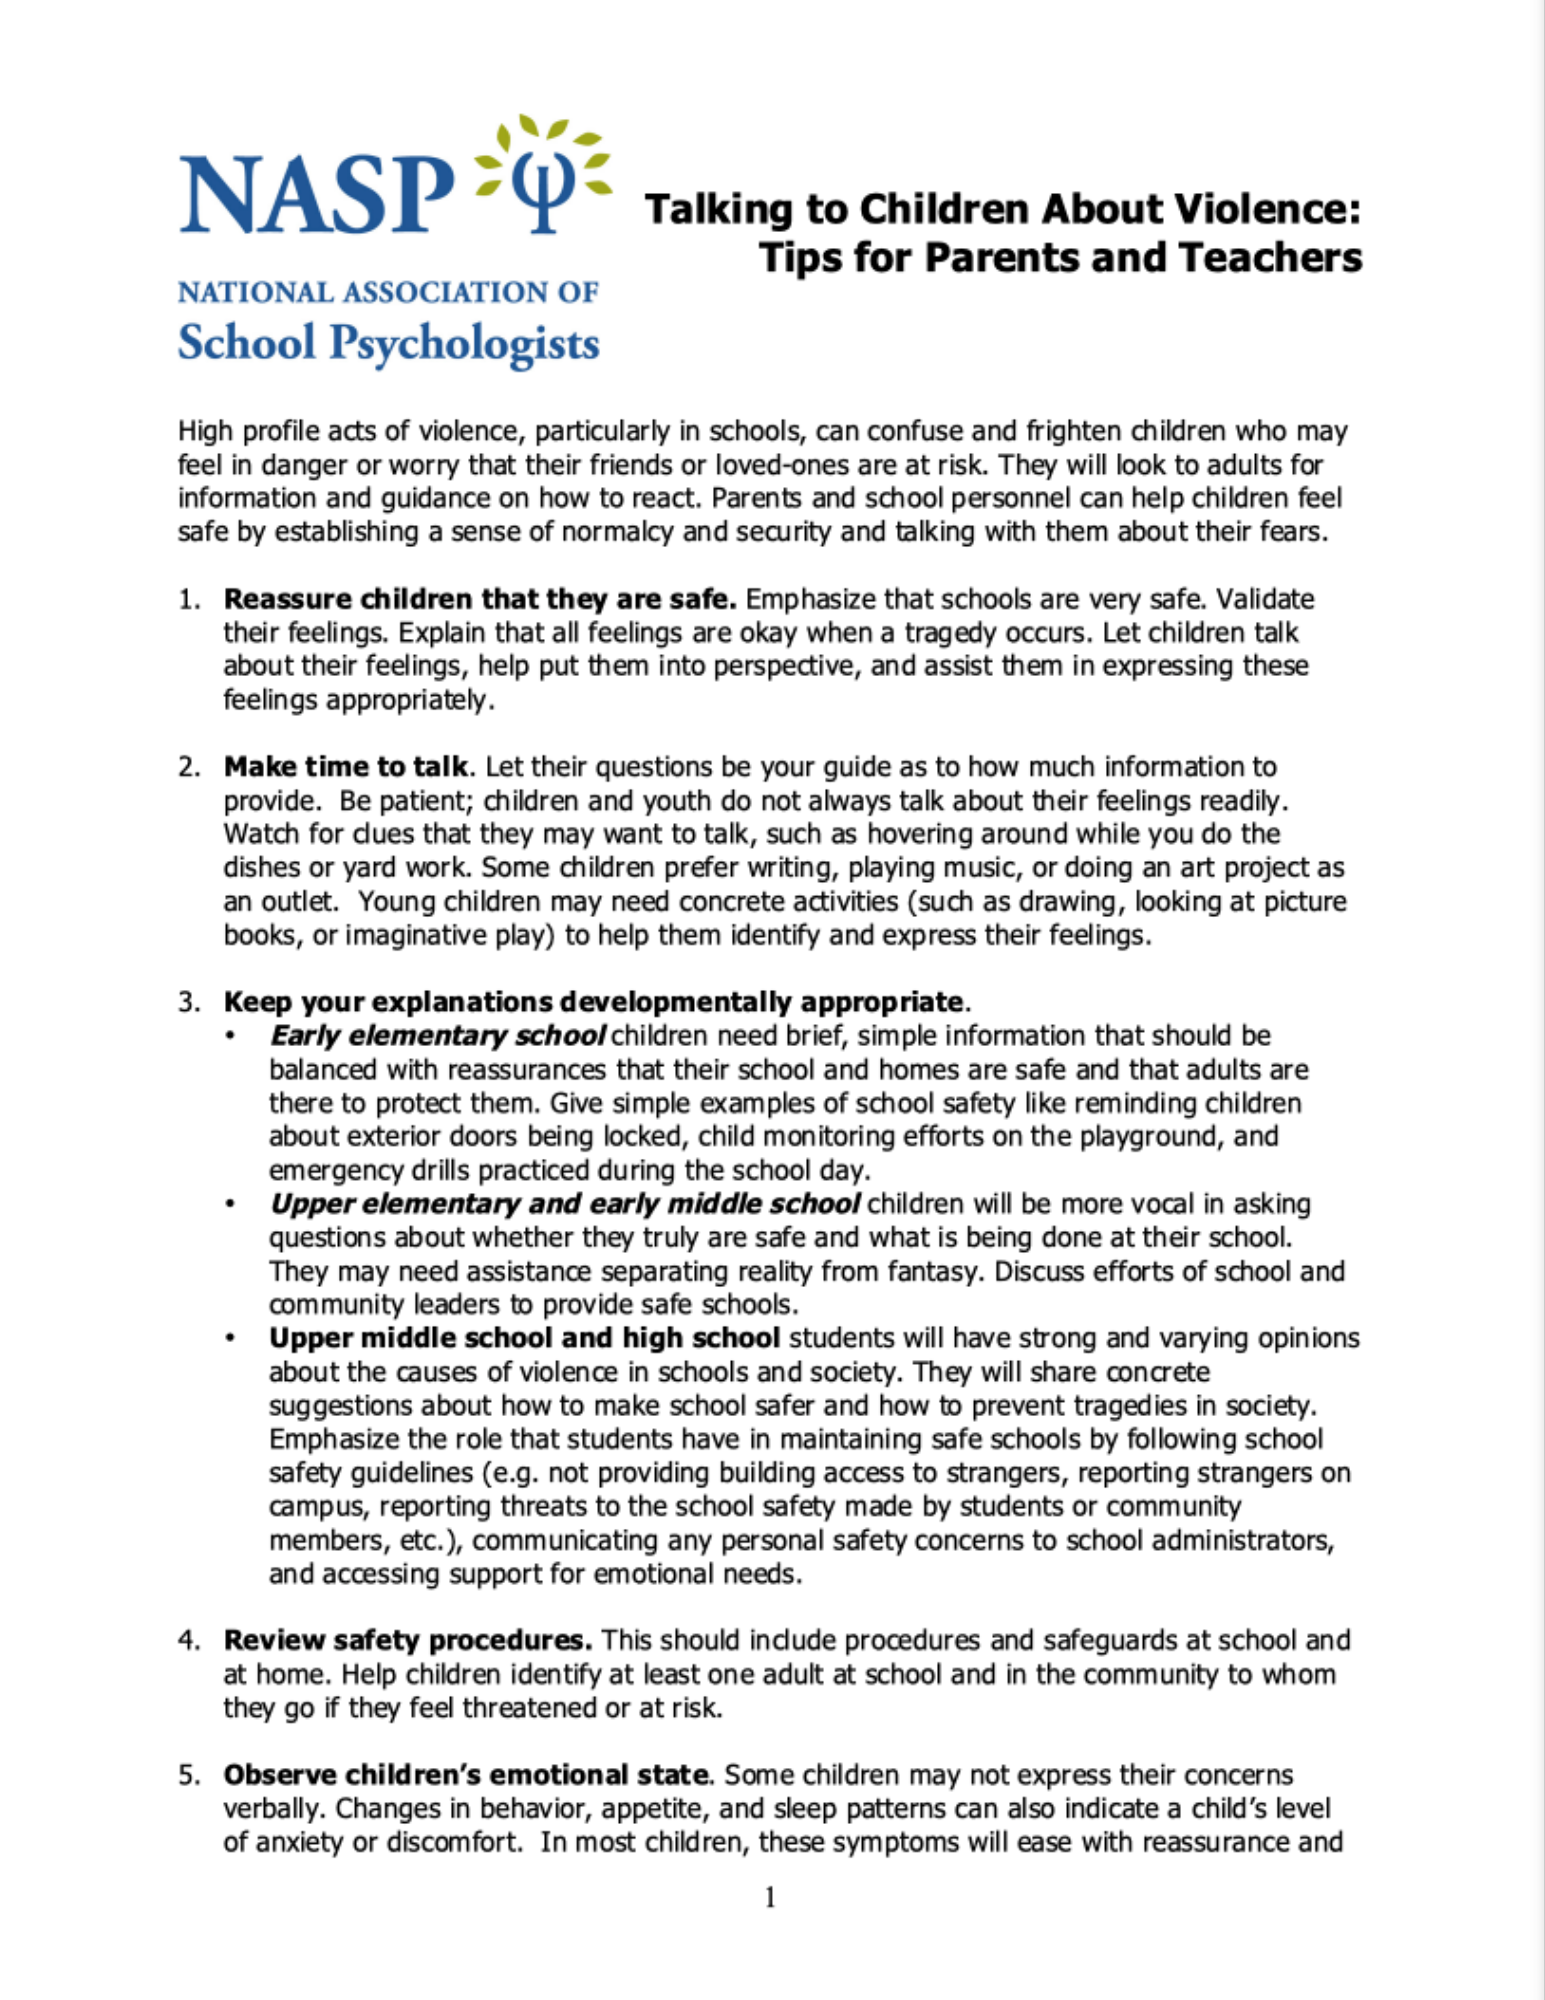 Talking to Children About Violence page 1 of 2 (Tips for Parents)